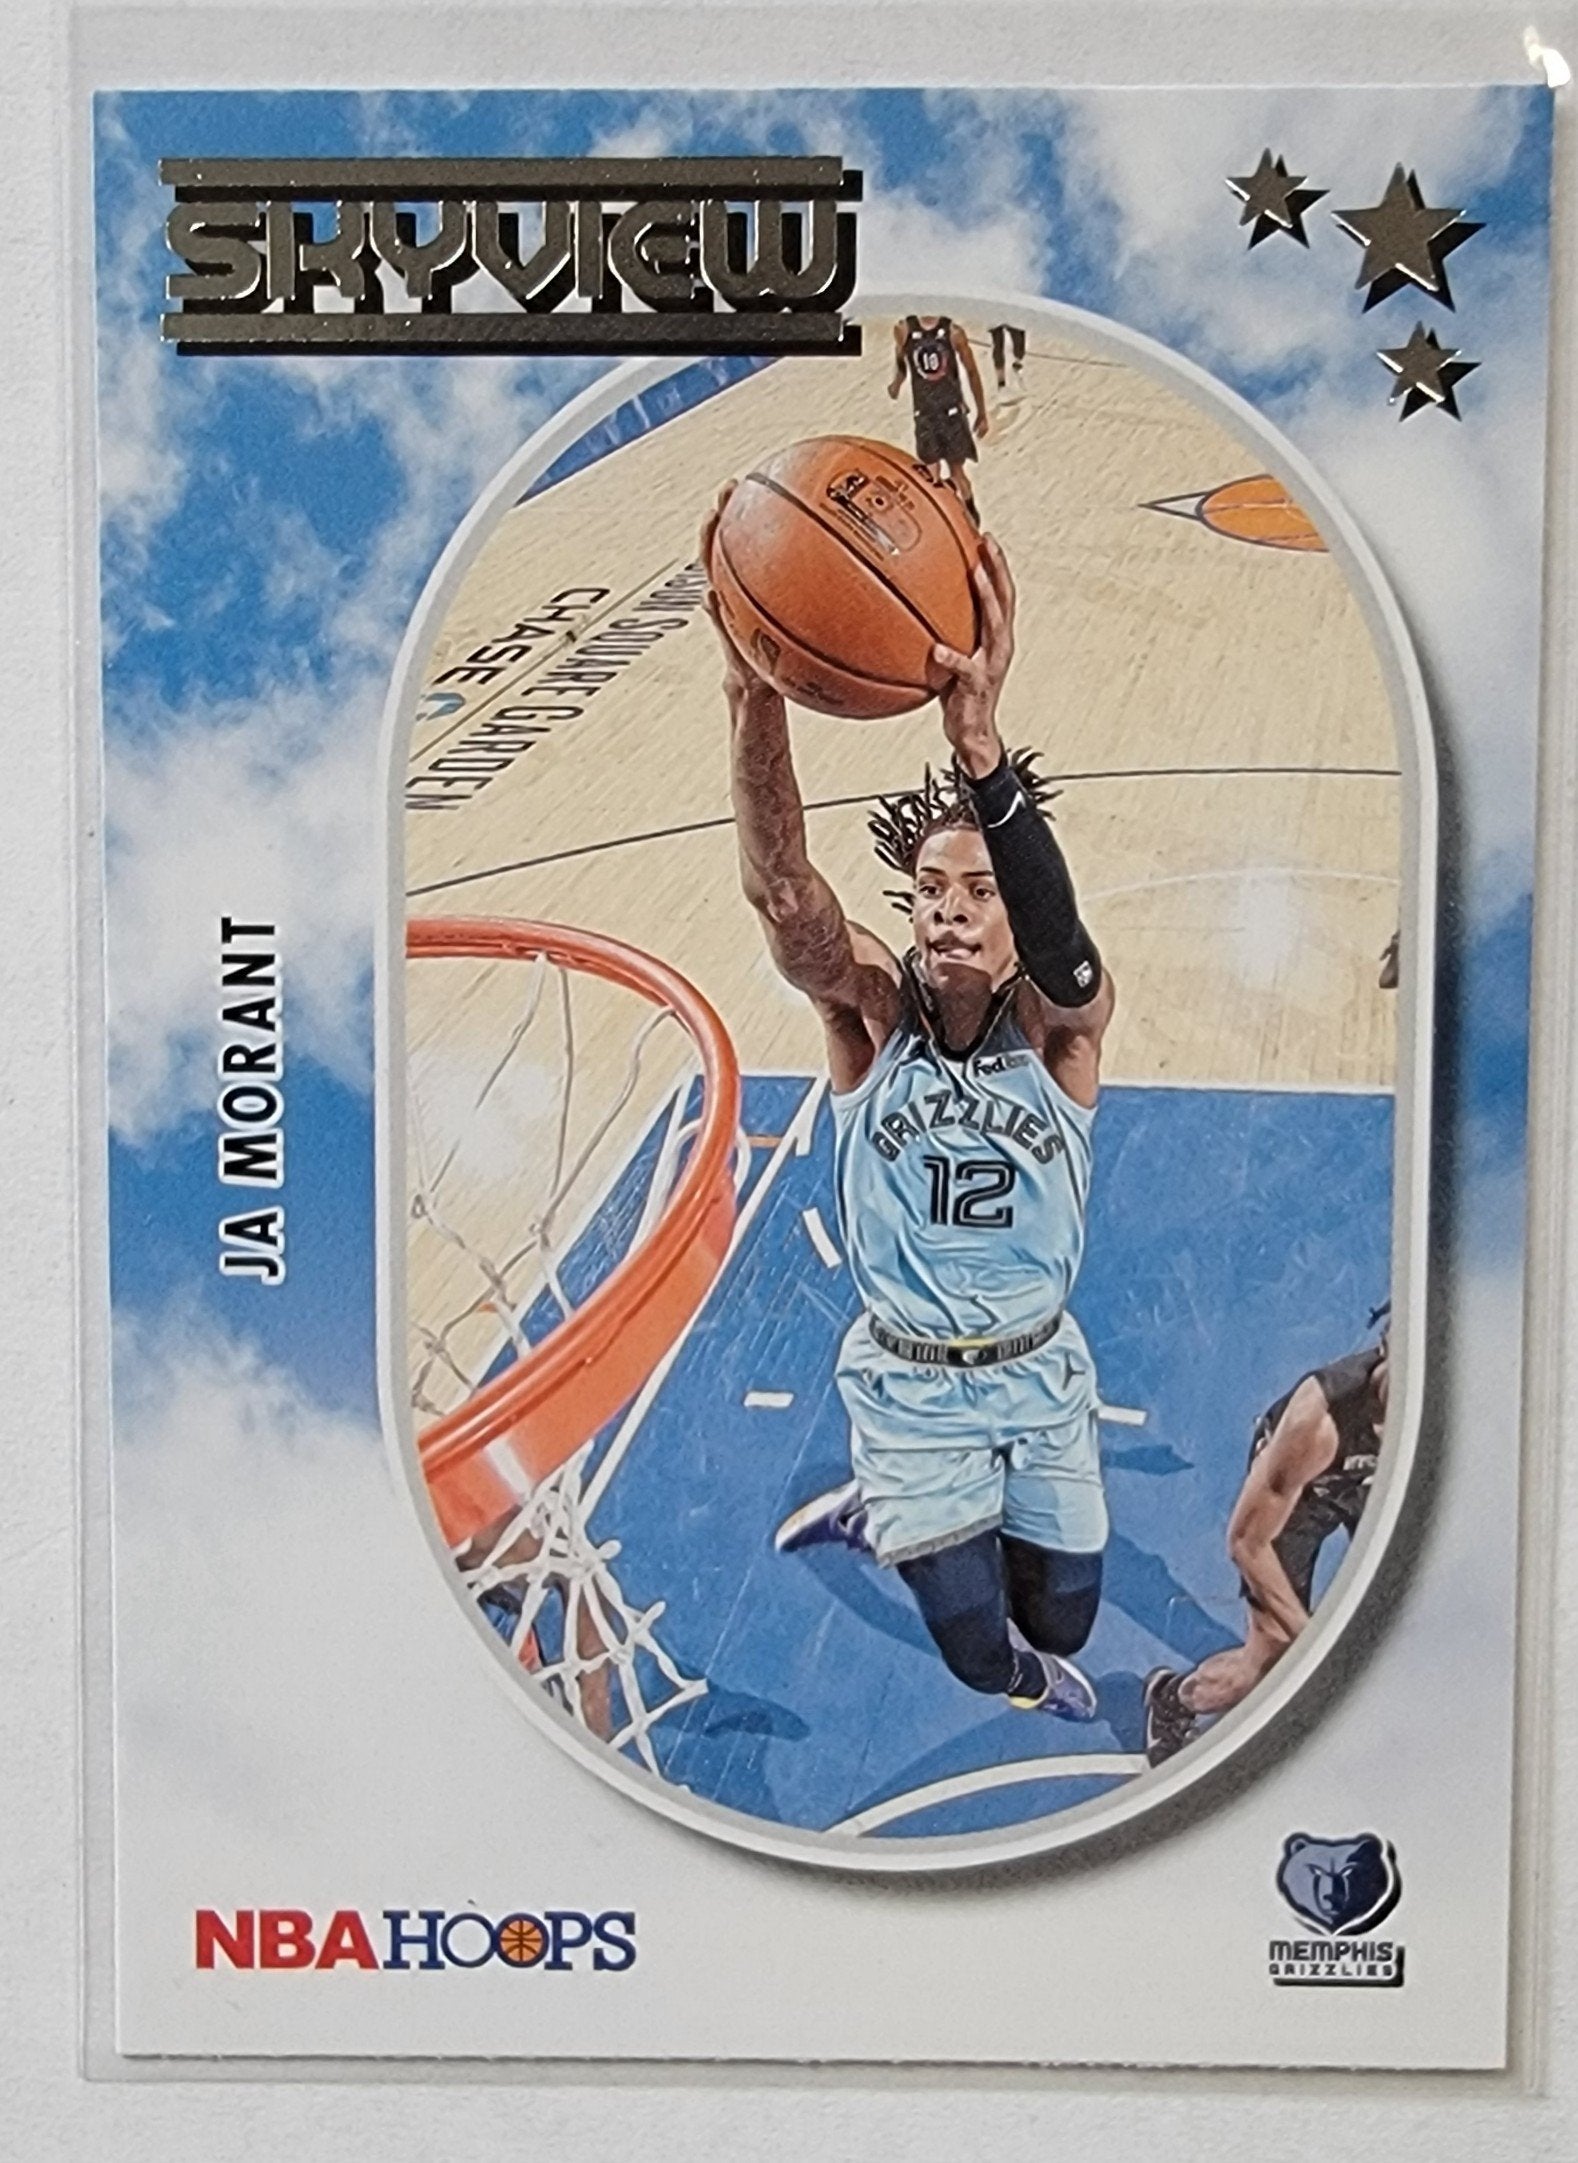 2021-22 Panini NBA Hoops Ja Morant Skyview Insert Basketball Card AVM1 simple Xclusive Collectibles   